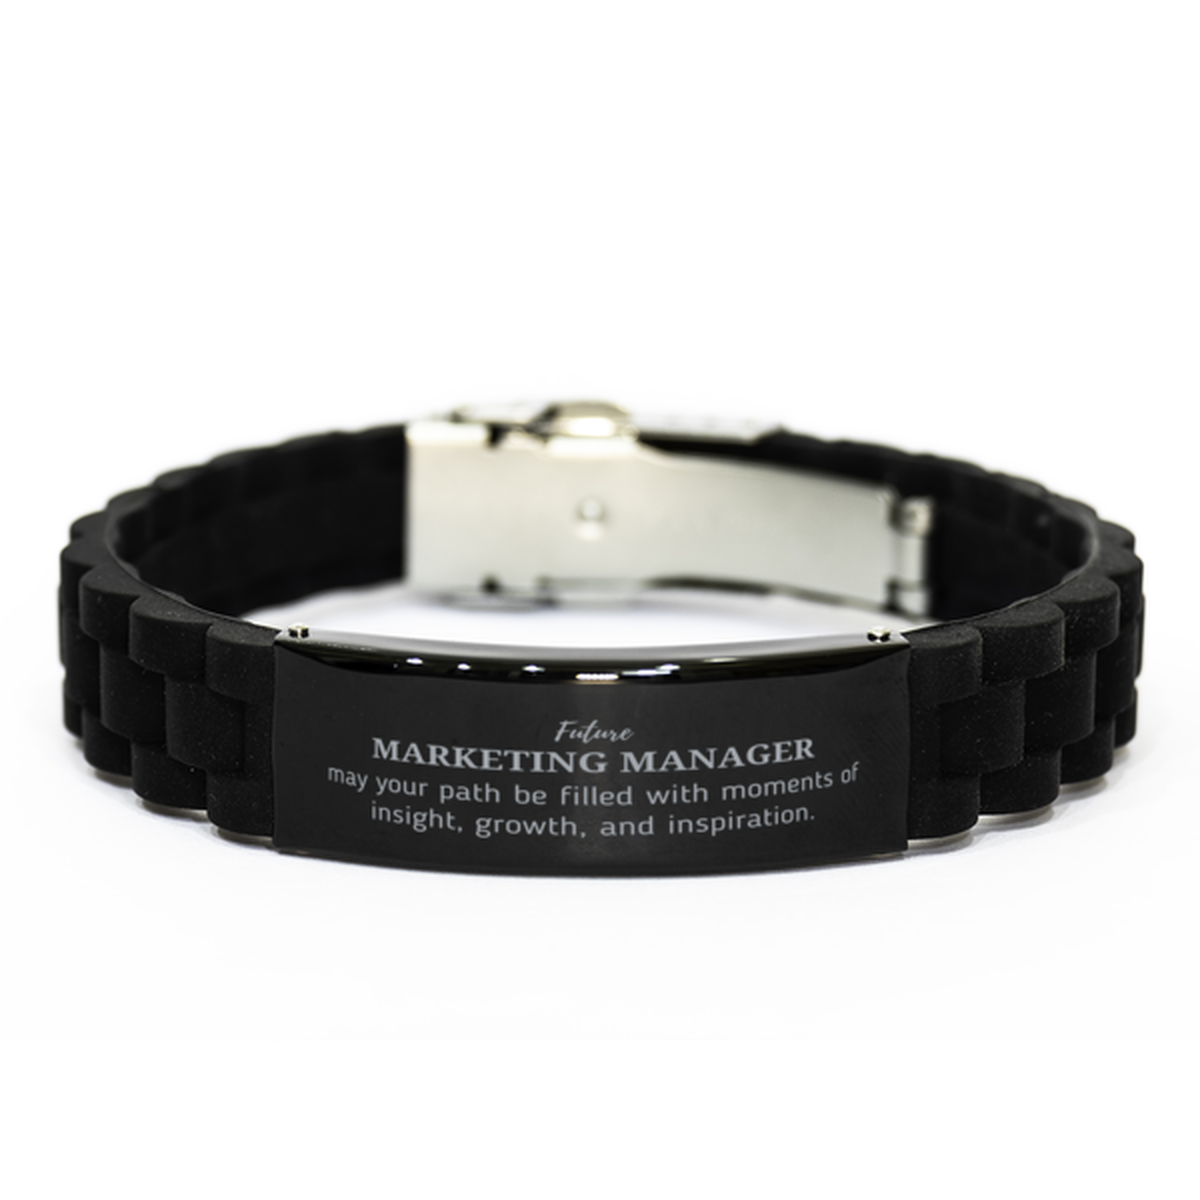 Future Marketing Manager Gifts, May your path be filled with moments of insight, Graduation Gifts for New Marketing Manager, Christmas Unique Black Glidelock Clasp Bracelet For Men, Women, Friends